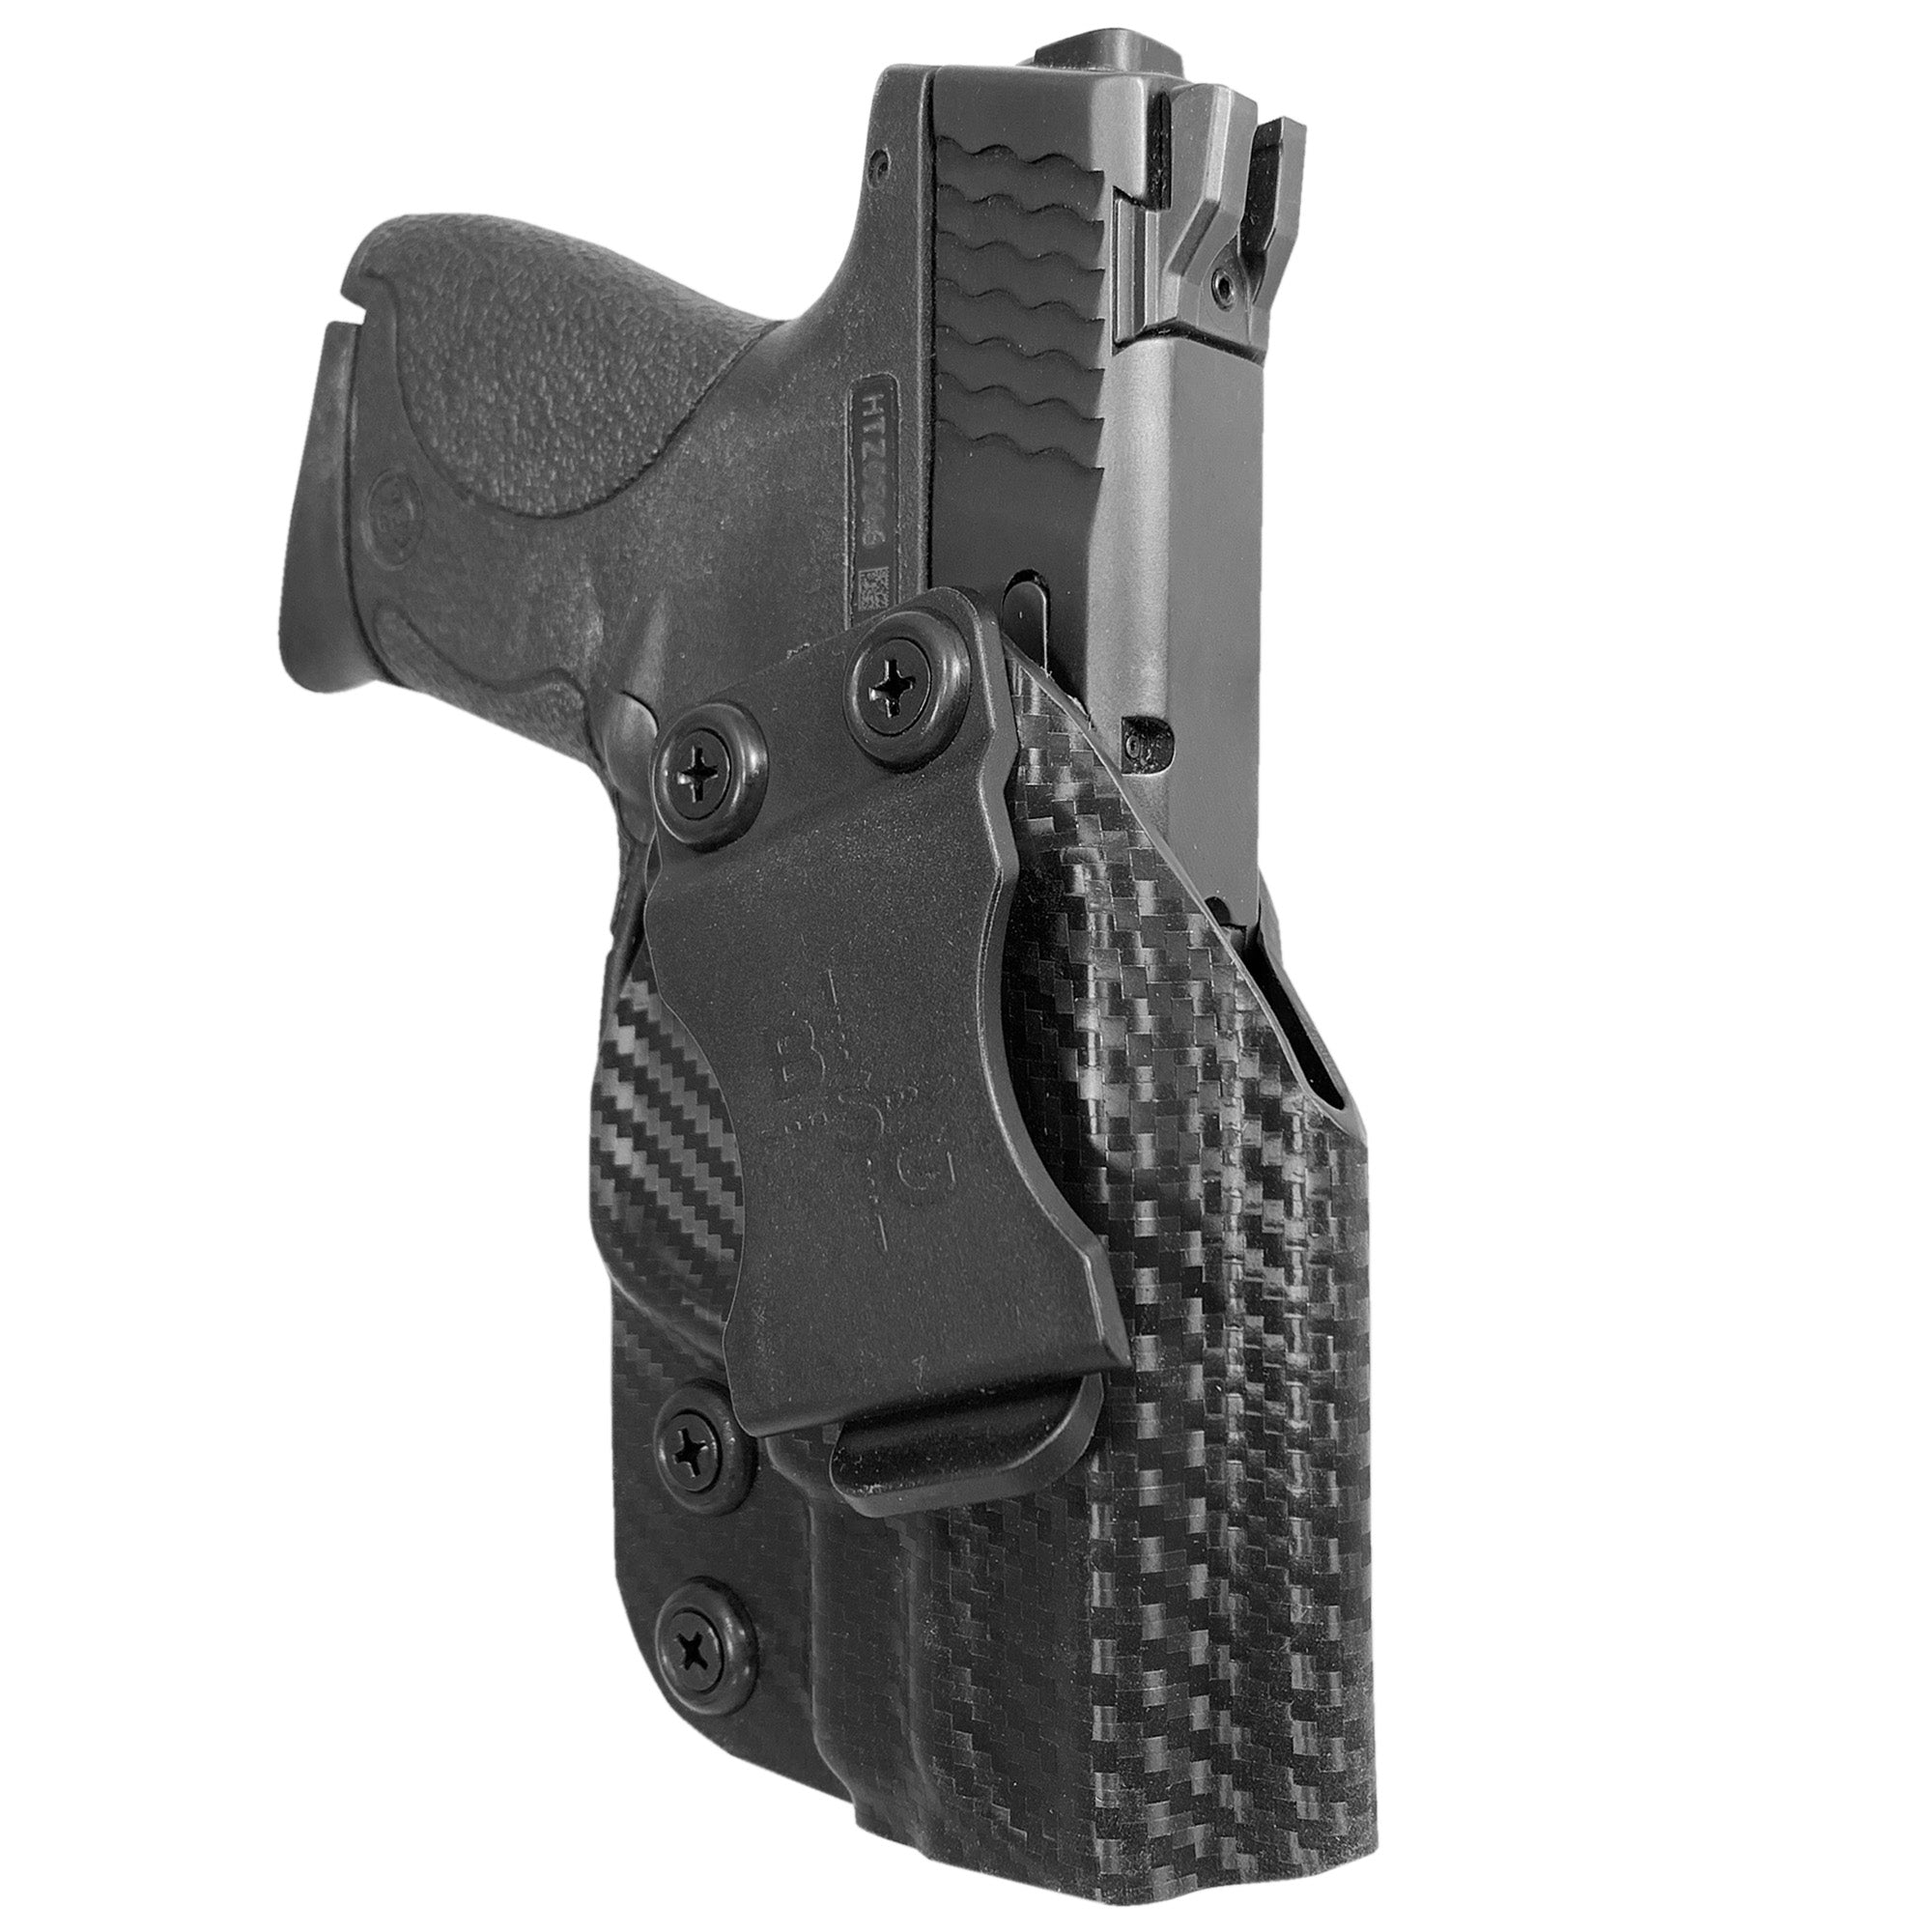 Smith & Wesson MP Shield IWB Kydex Holster - Low Profile